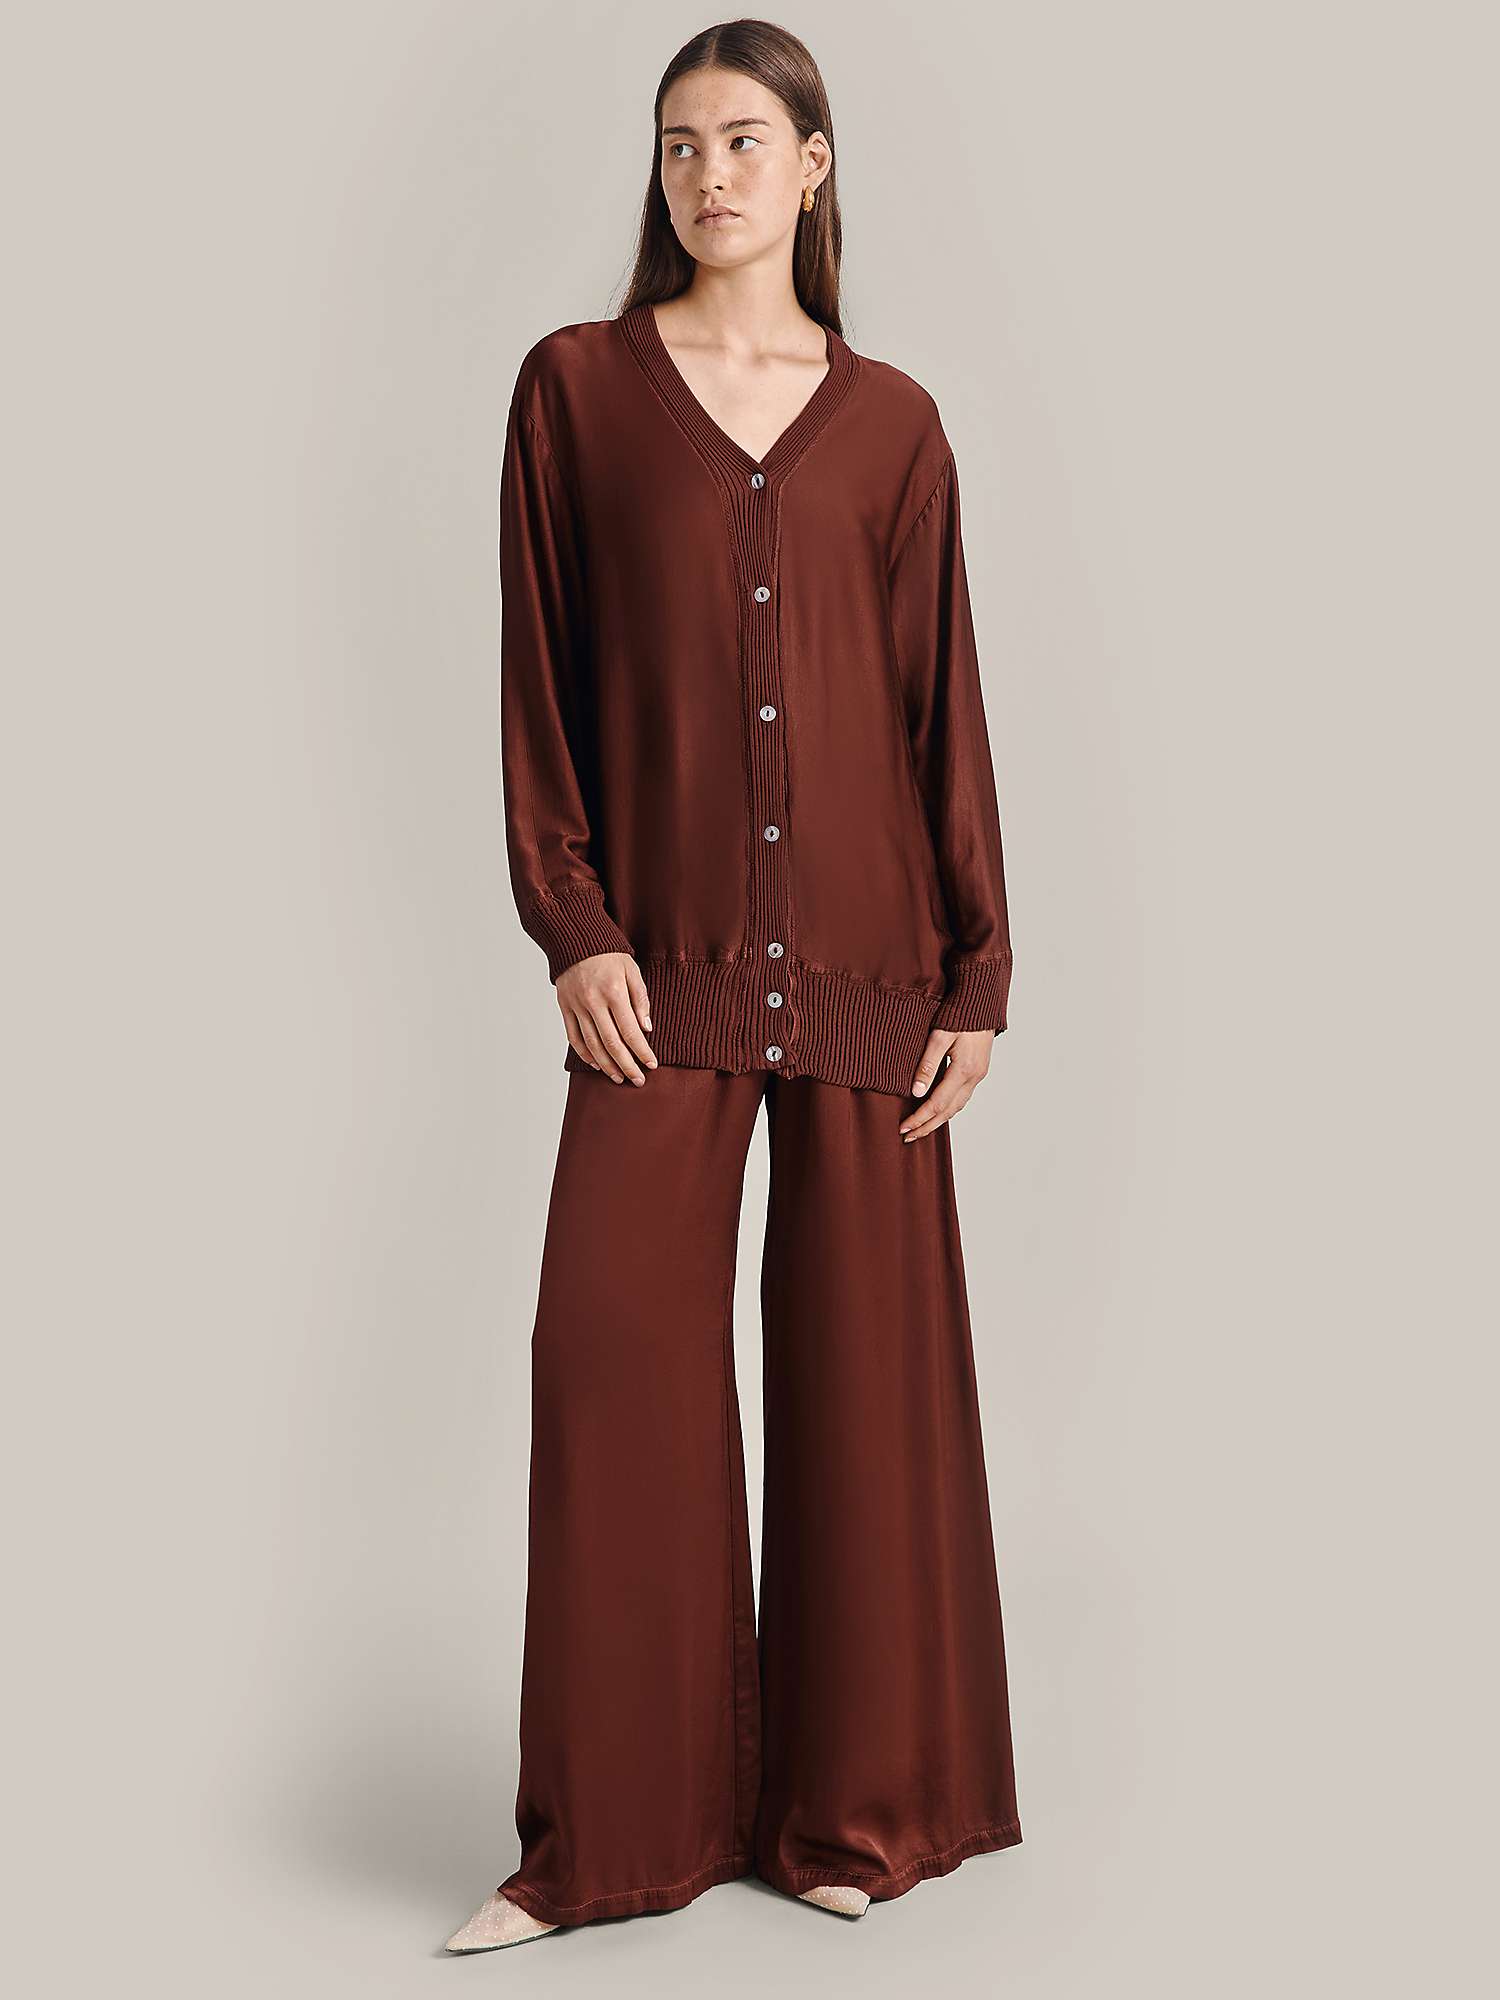 Buy Ghost Lulu Flared Trousers Online at johnlewis.com